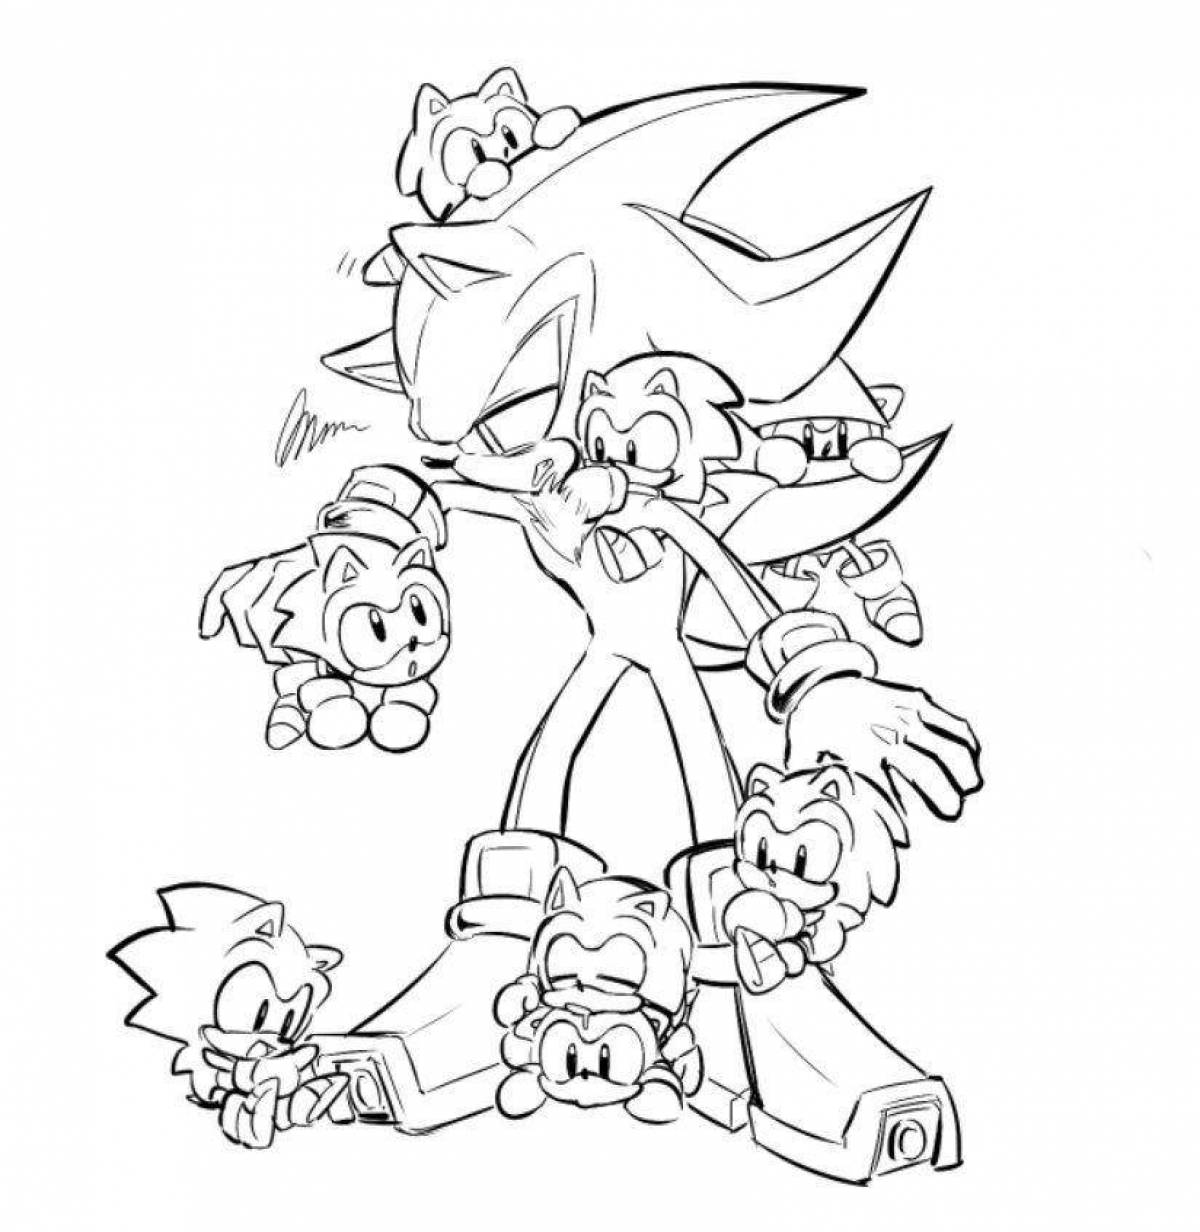 Sonic silver awesome coloring book